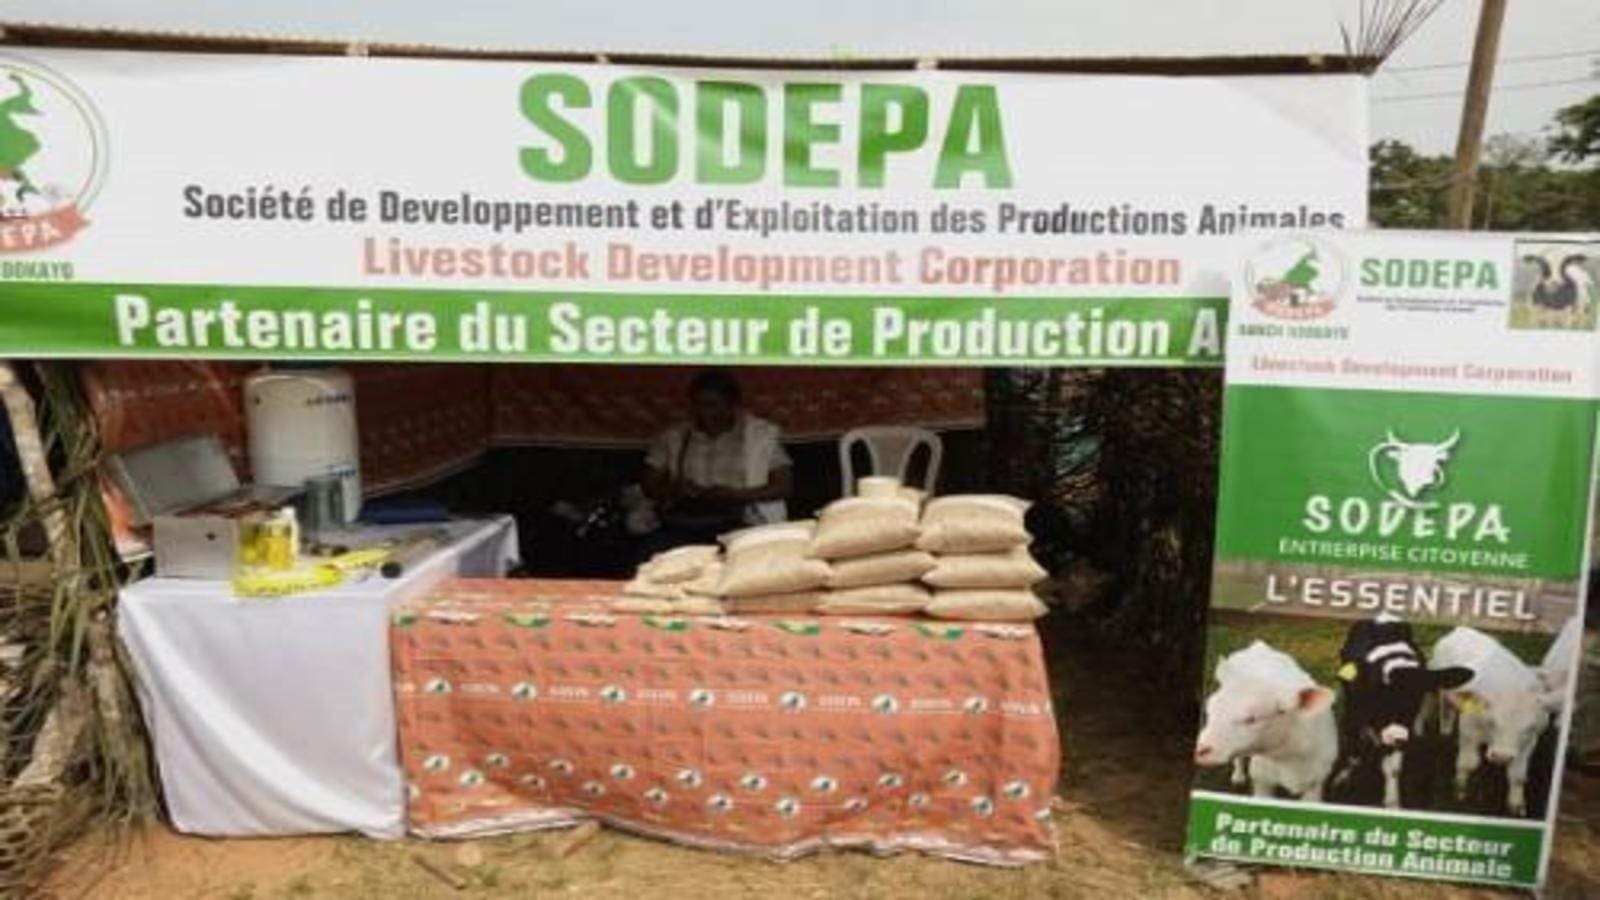 Cameroonian Livestock Development Corporation becomes a full fledged public entity